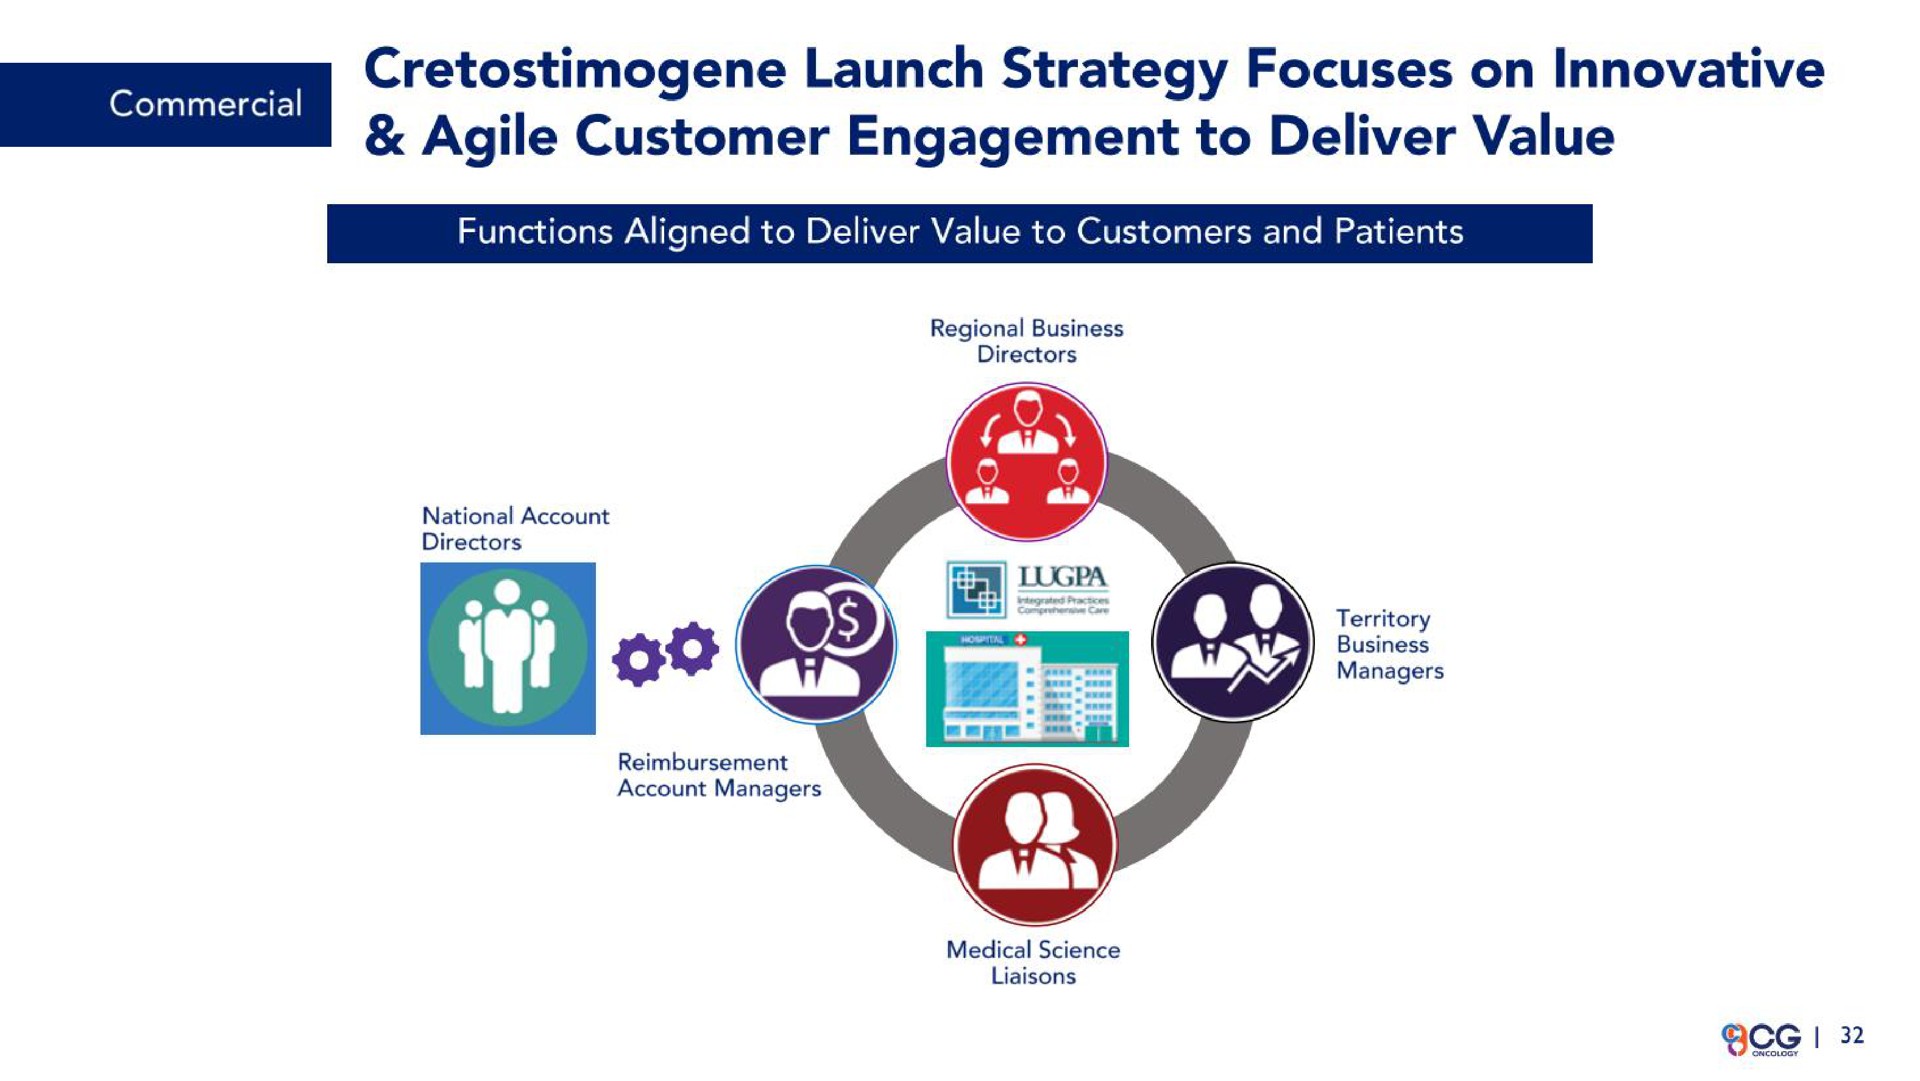 launch strategy focuses on innovative agile customer engagement to deliver value | CG Oncology